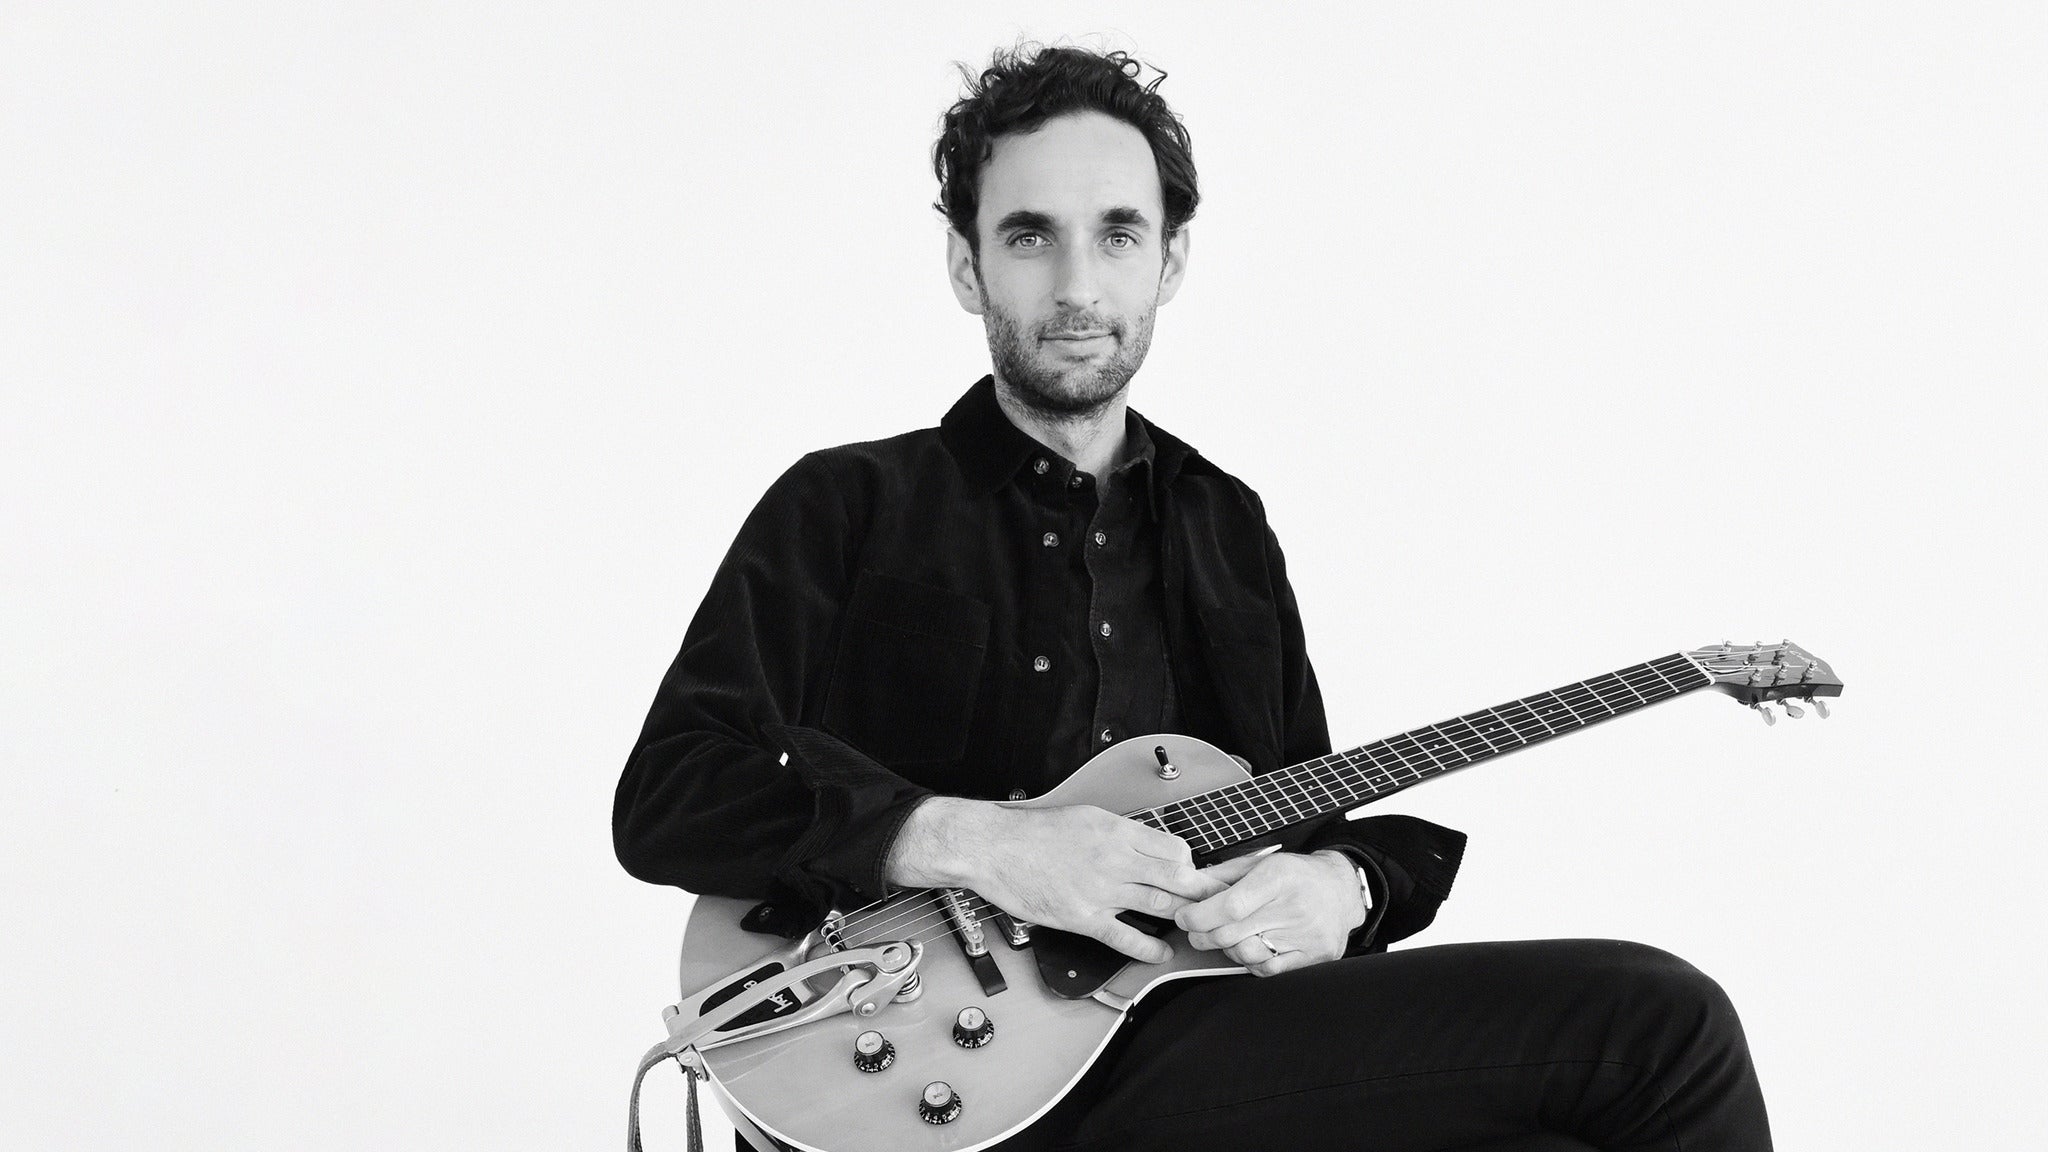 Julian Lage pre-sale password for early tickets in Chicago